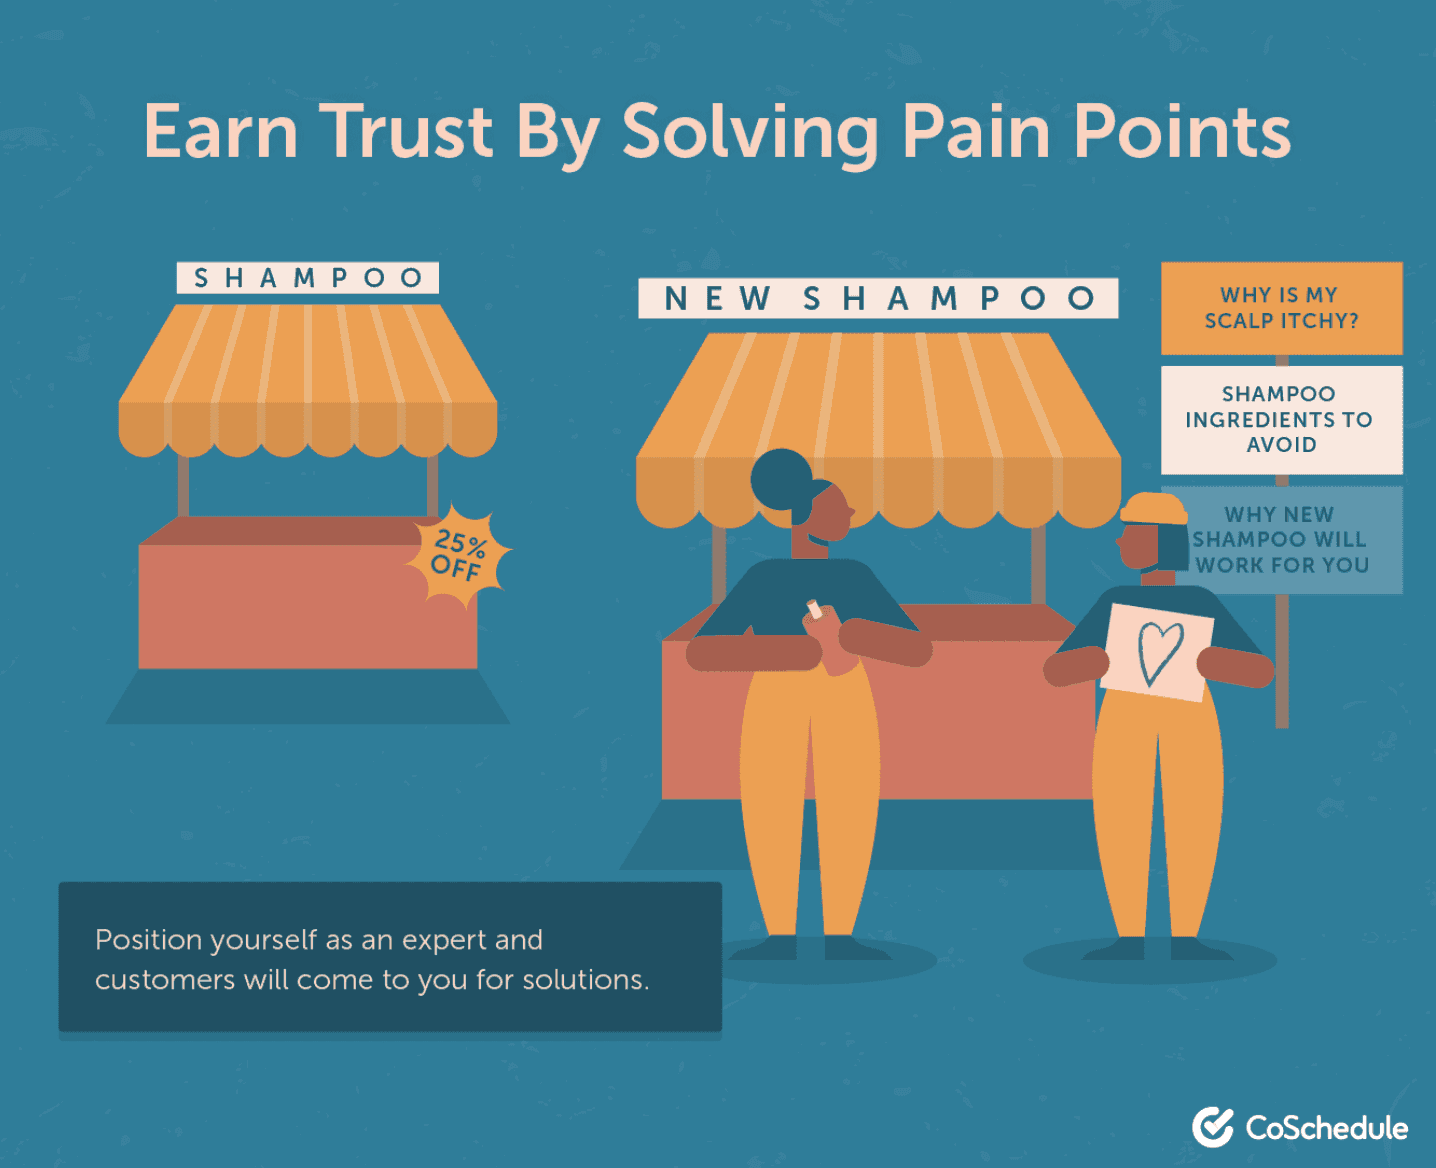 Work with your customer success team to find pain points